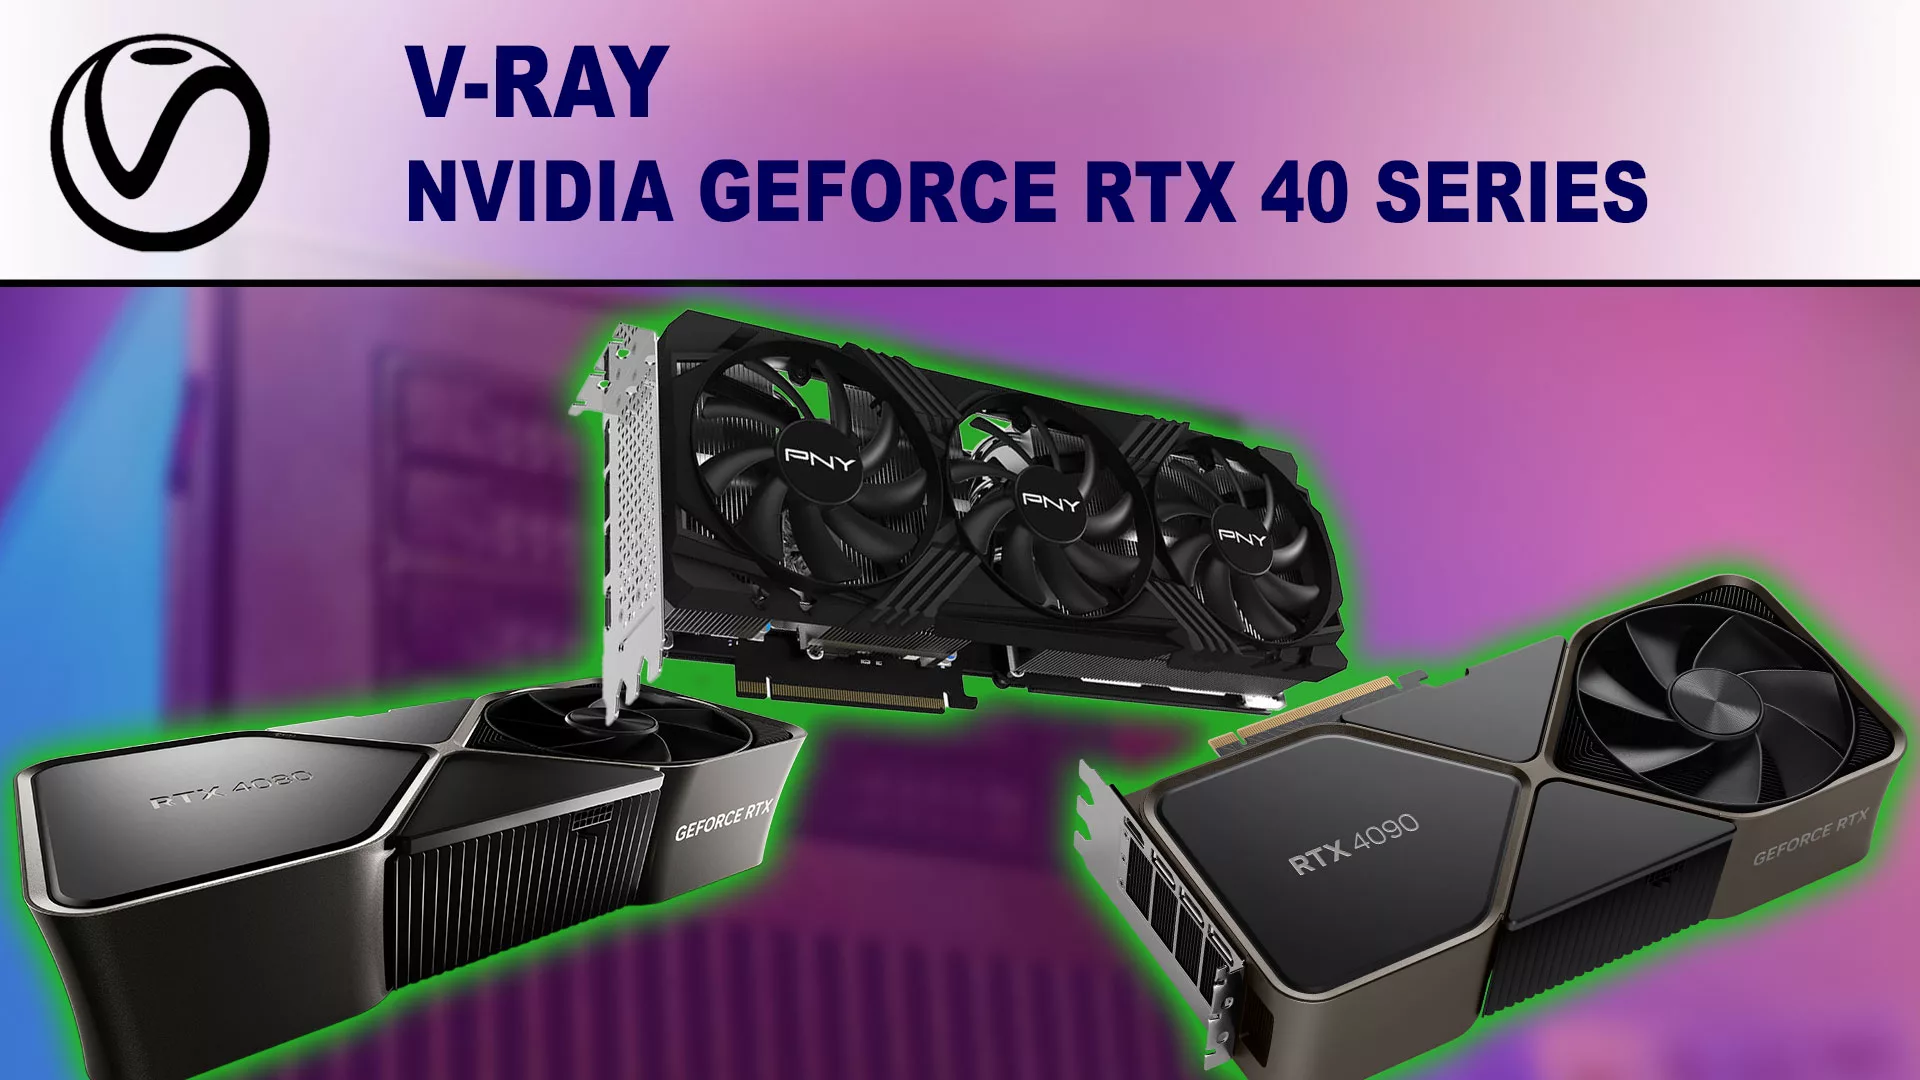 Nvidia GeForce RTX 4080 16GB Review [Content Creation, Rendering